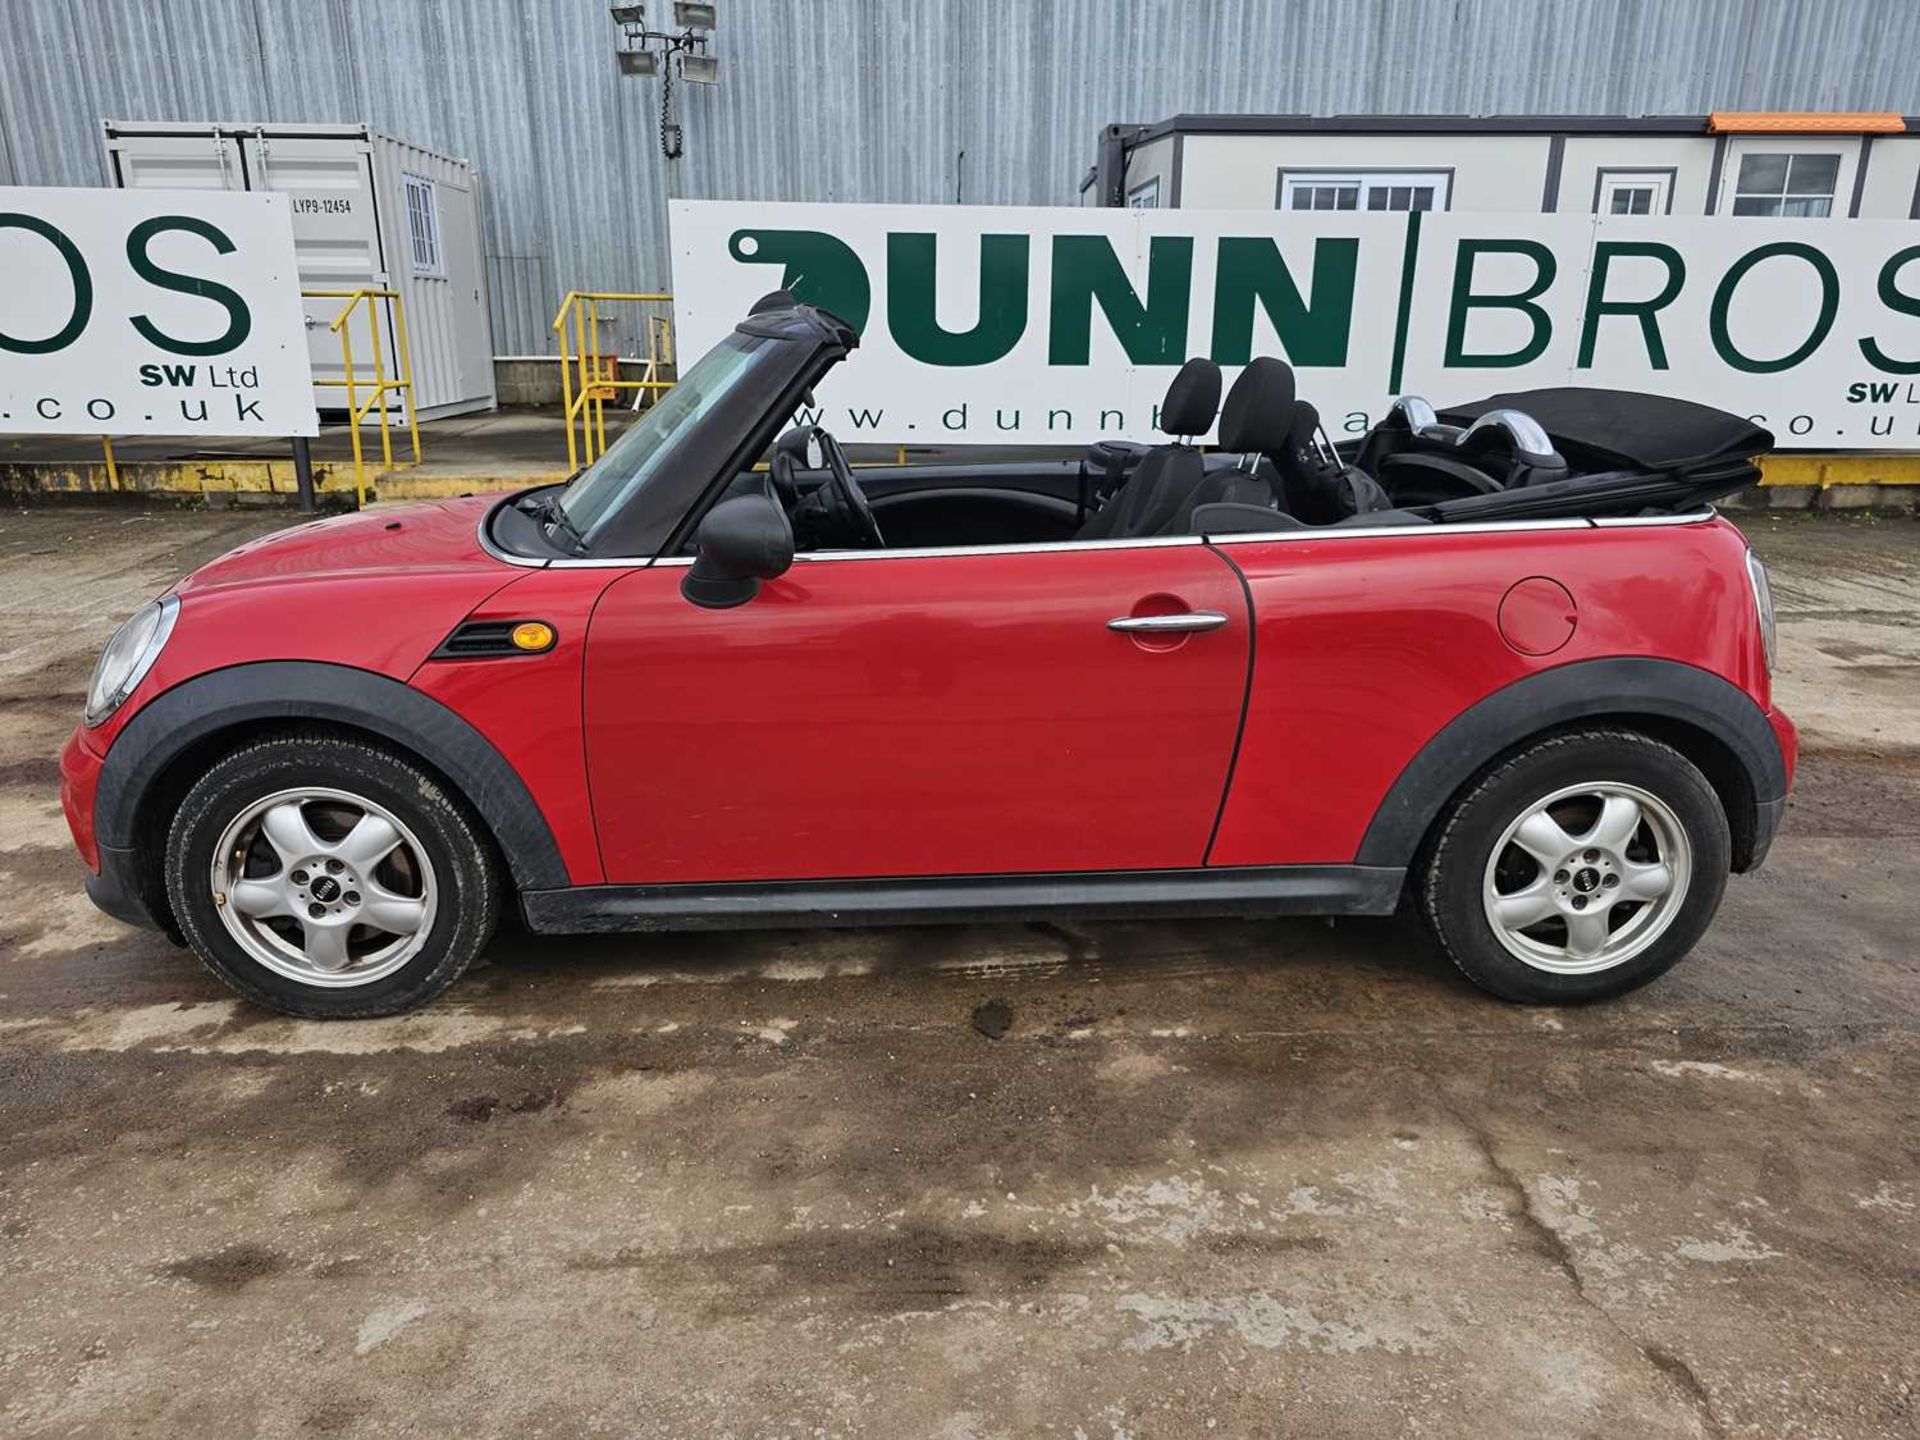 2011 Mini One Convertible, 6 Speed, Bluetooth, Cruise Control, A/C (Reg. Docs. Available) - Image 6 of 25